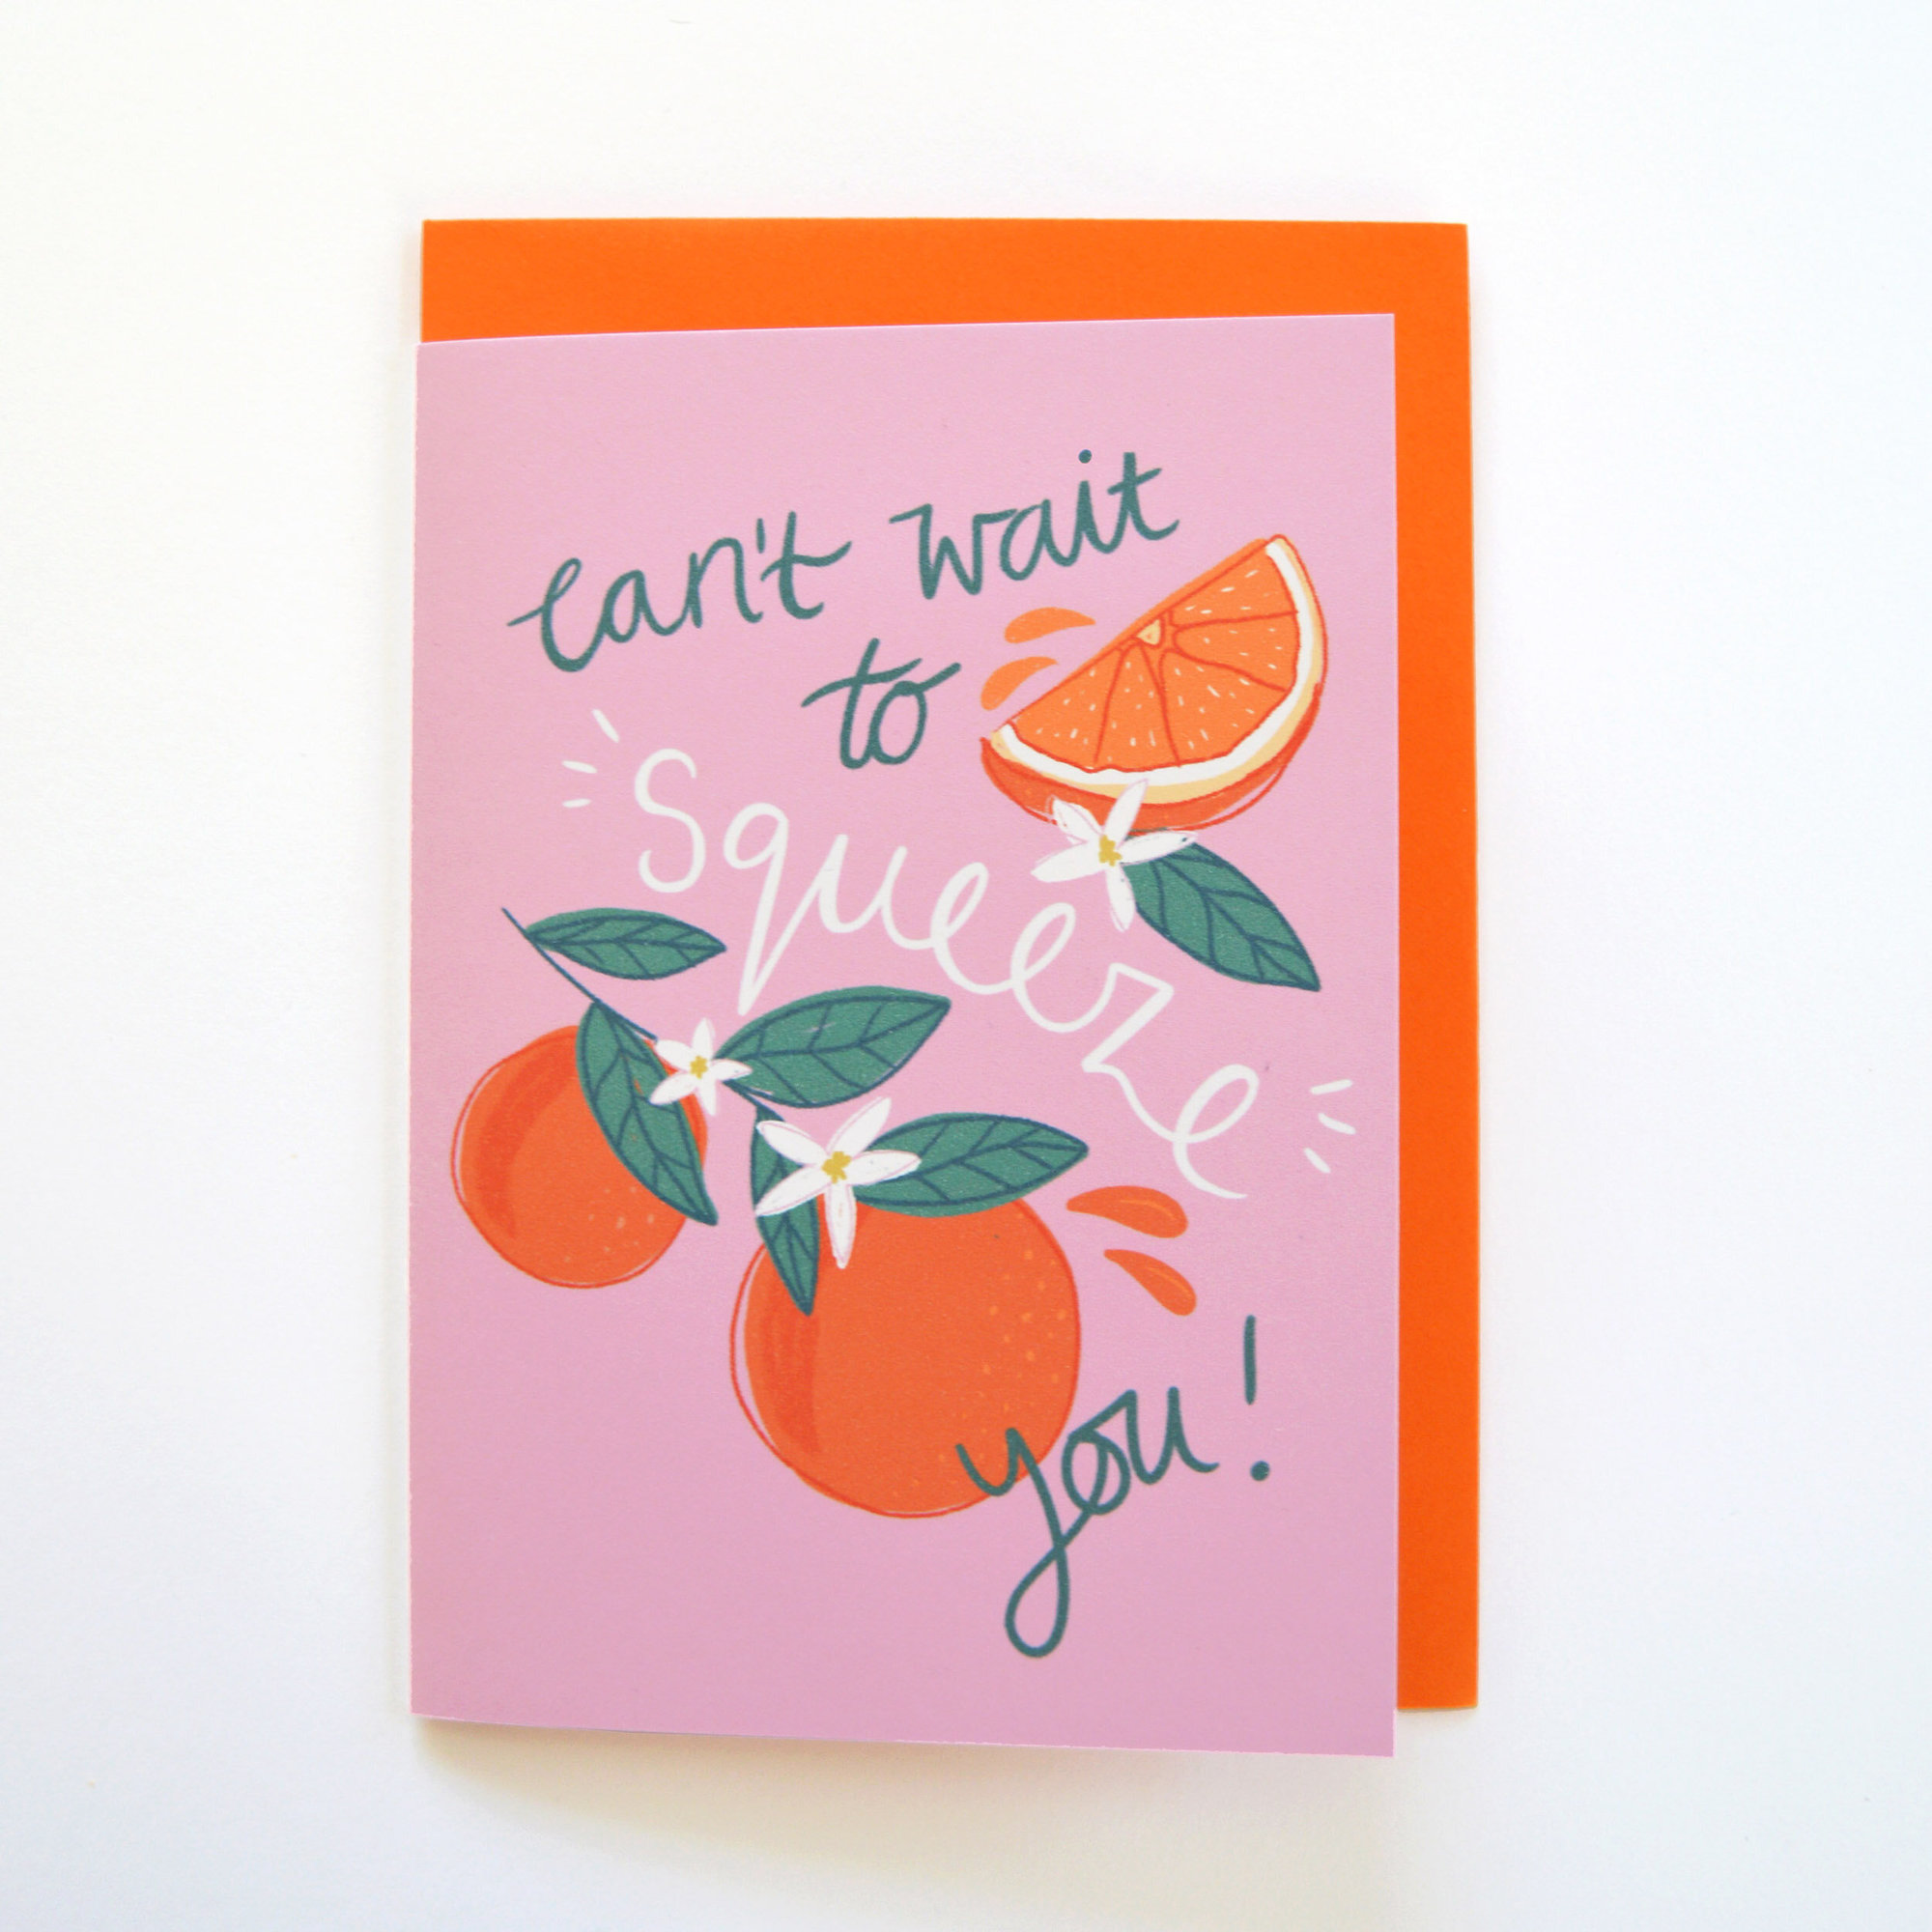 Can't Wait To Squeeze You! 
Botanical Orange Card - Just the card, Standard Envelope